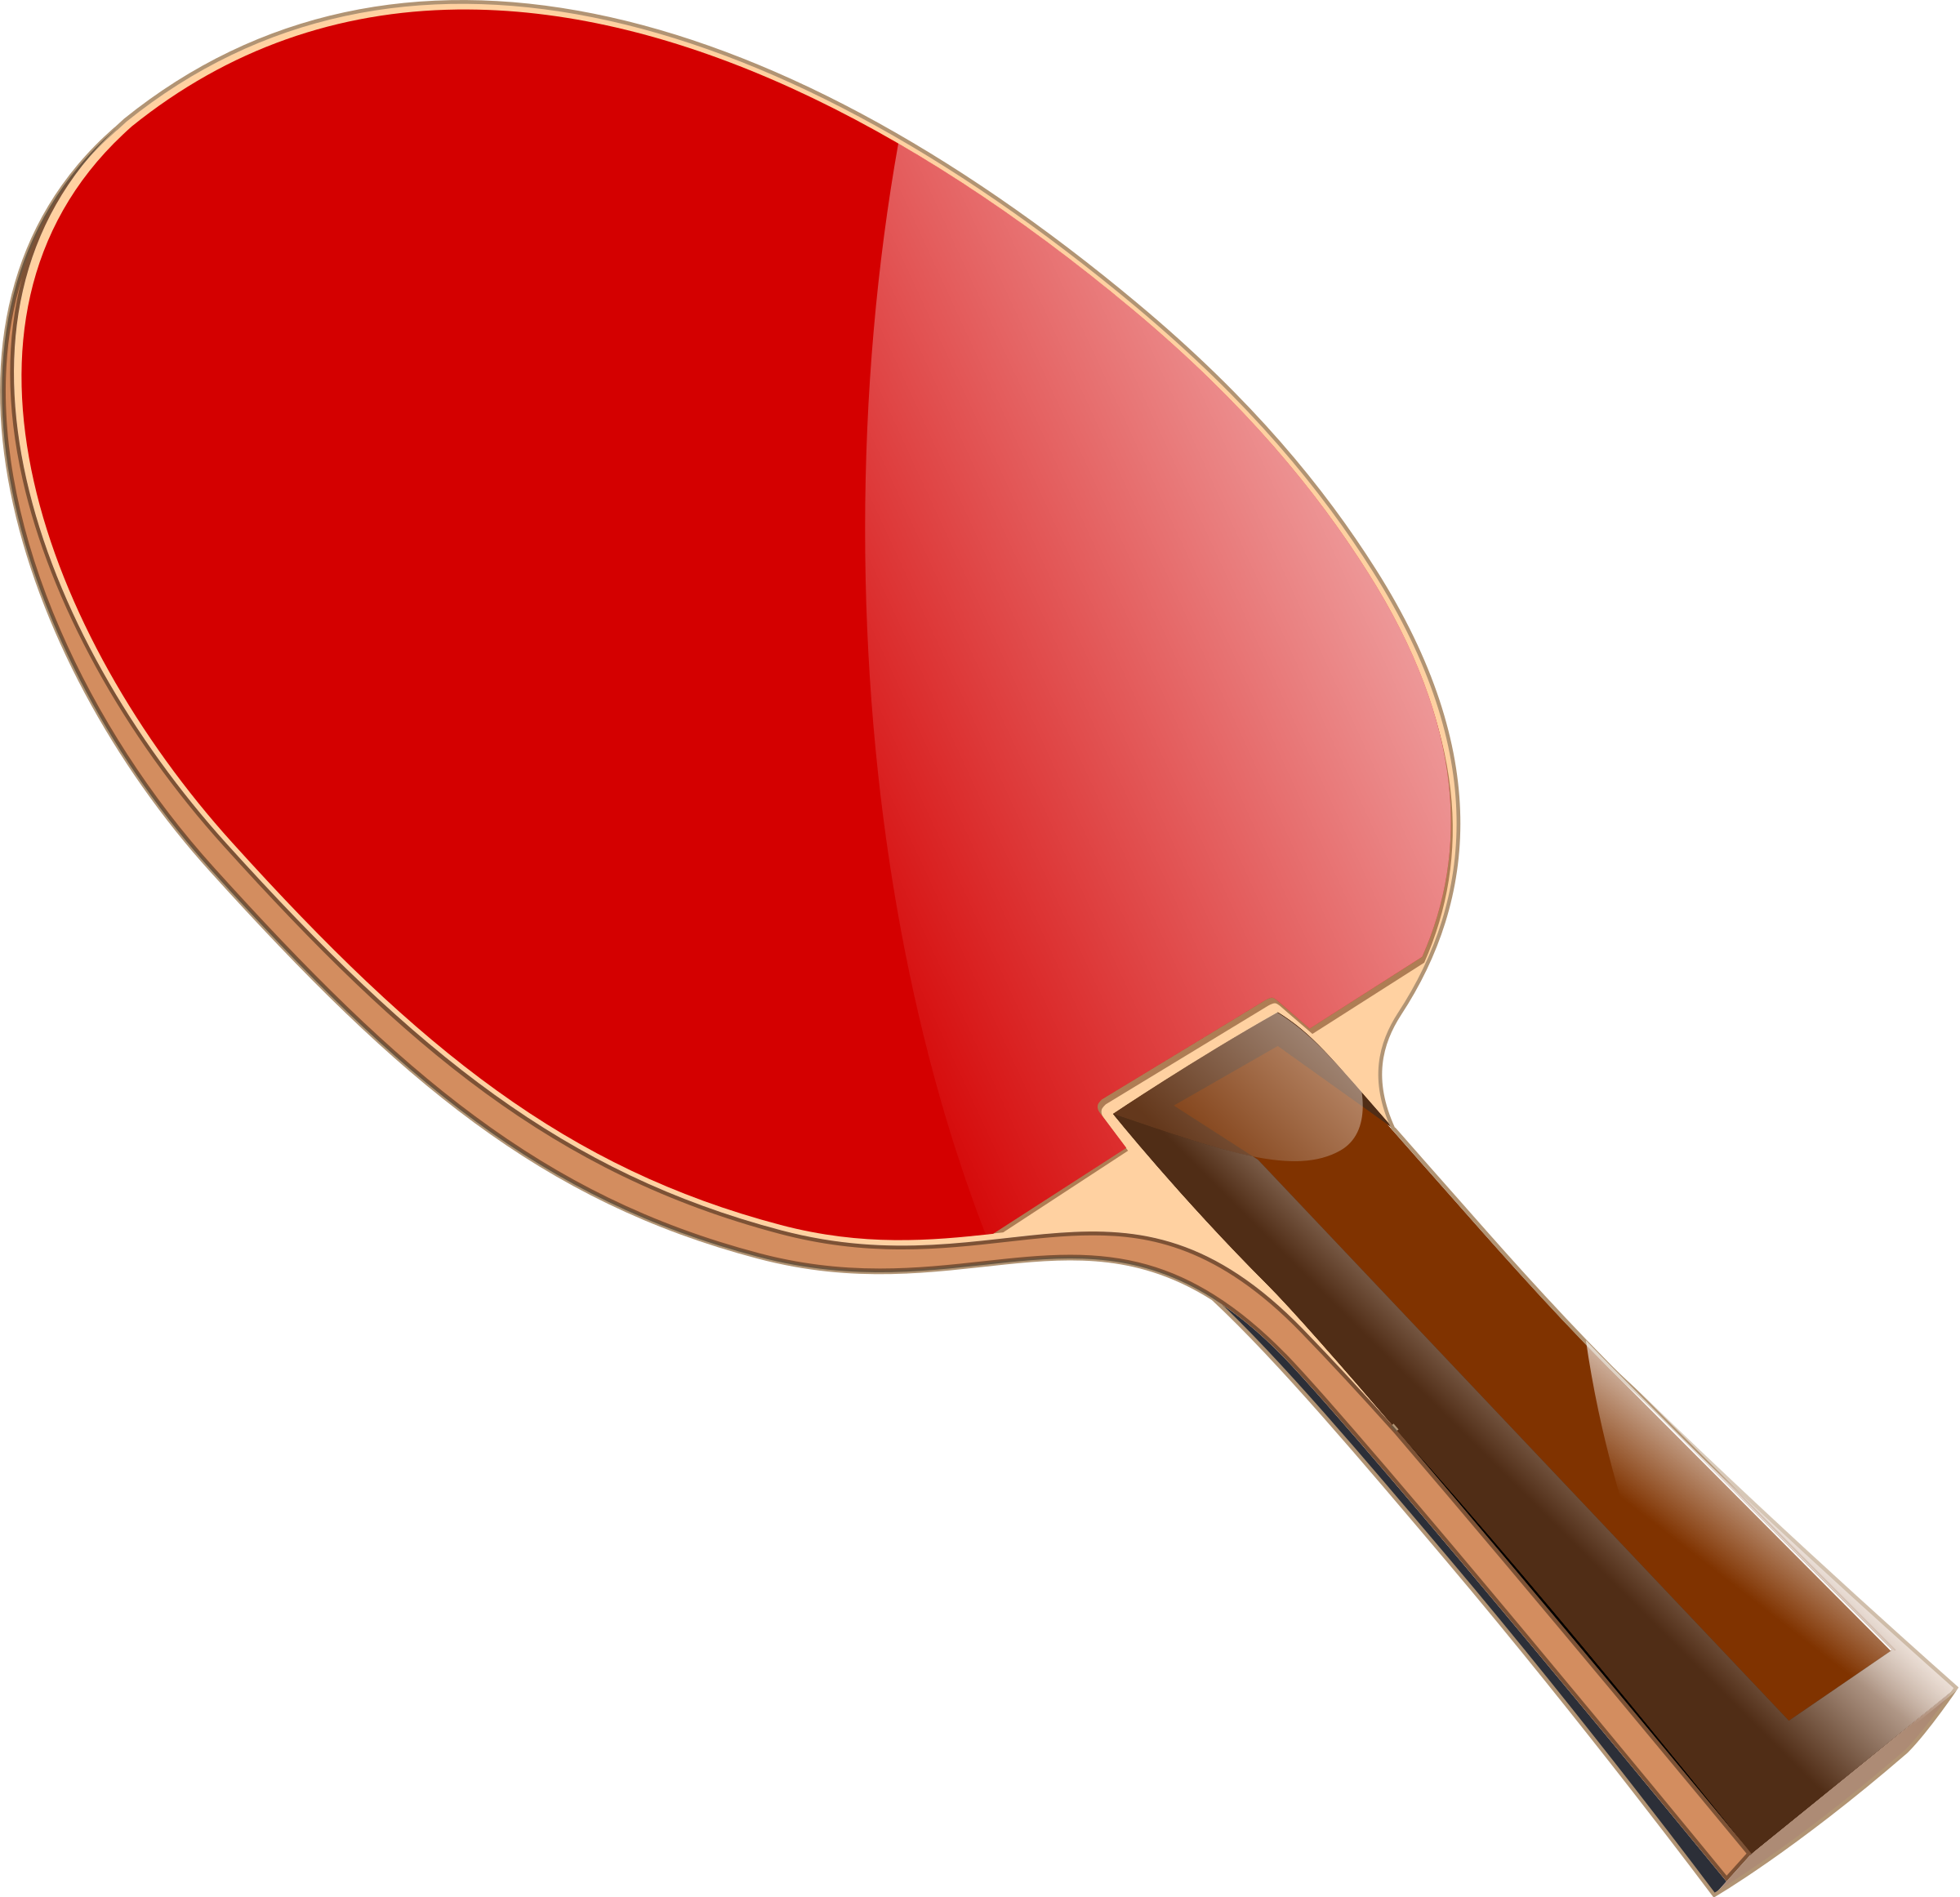 Ping Pong Racket Clipart Transparent Background, Textured Layered Wood Red  Ping Pong Clip Art, Ping Pong Clipart, Table Tennis, Clipart PNG Image For  Free Download